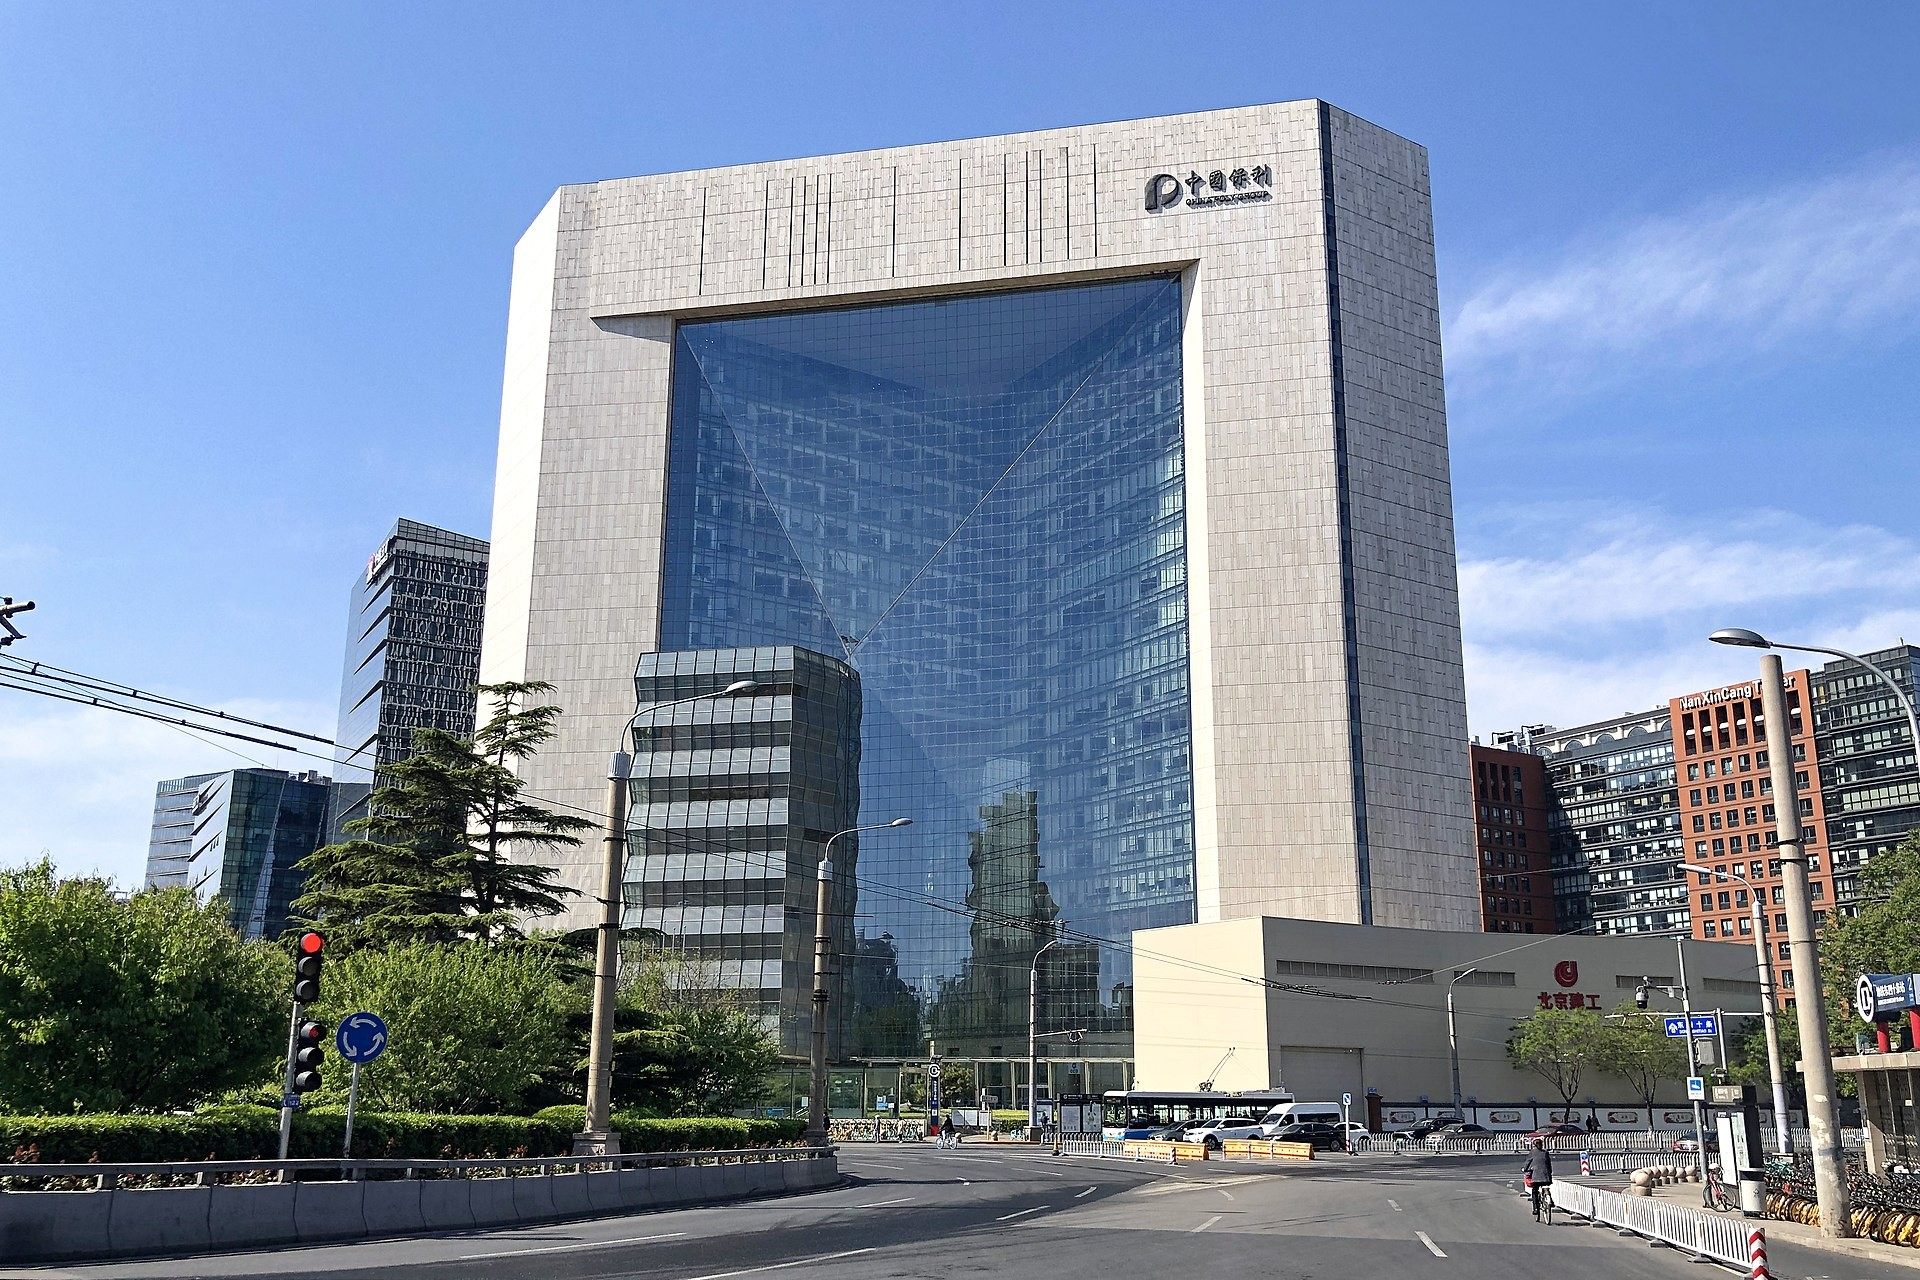 The New Poly Plaza in Beijing, which houses the CIC headquarters on the 8th floor. Photo: Wikipedia